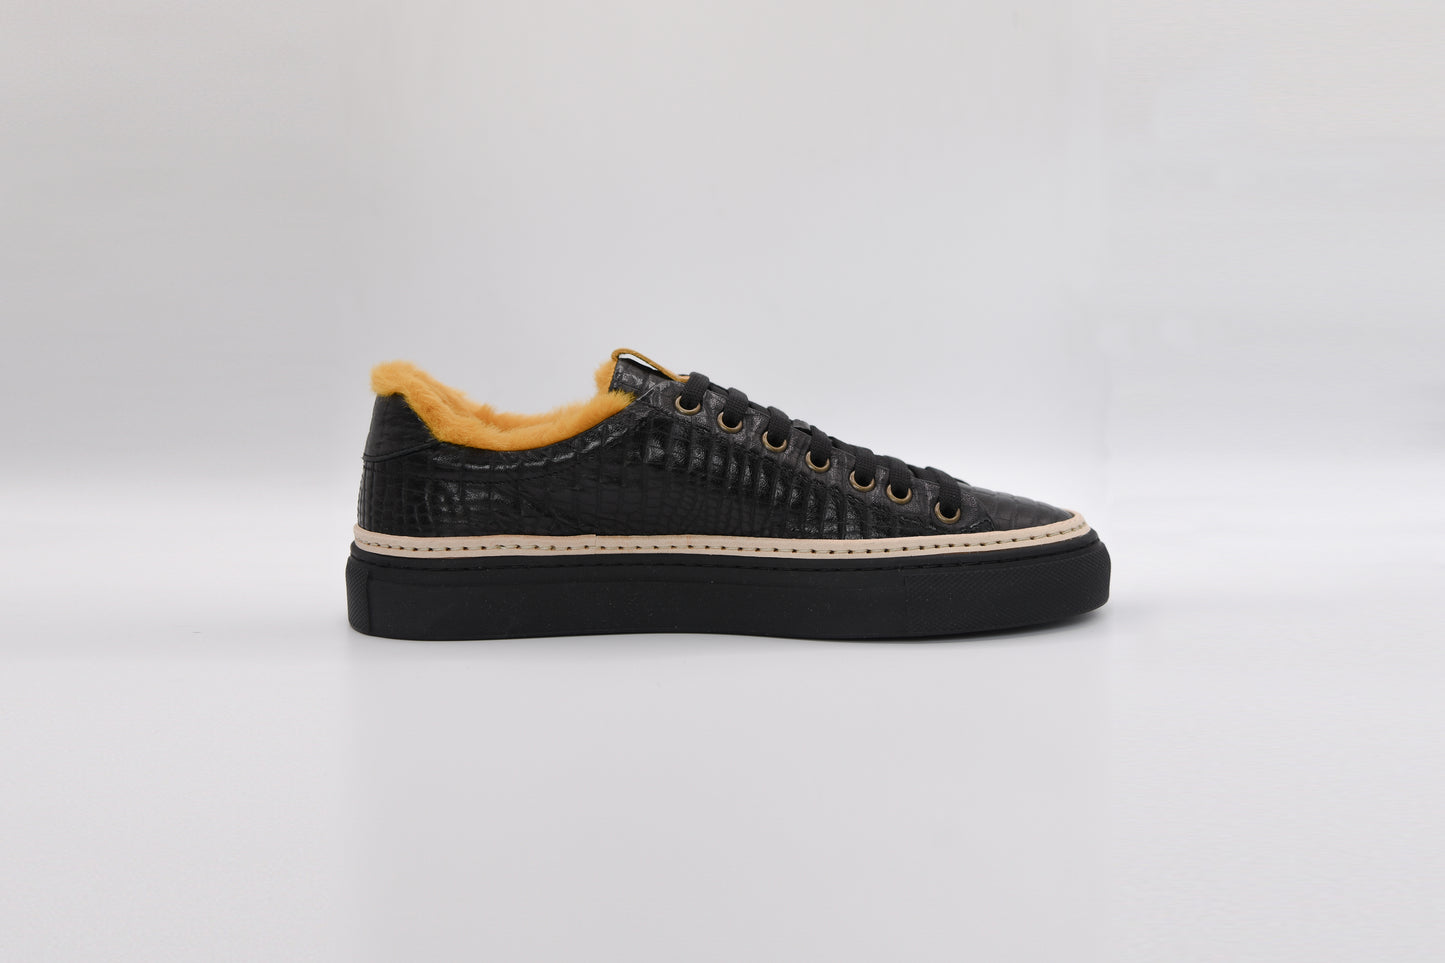 Men’s Black Leather Sneakers with Yellow Eco-Fur